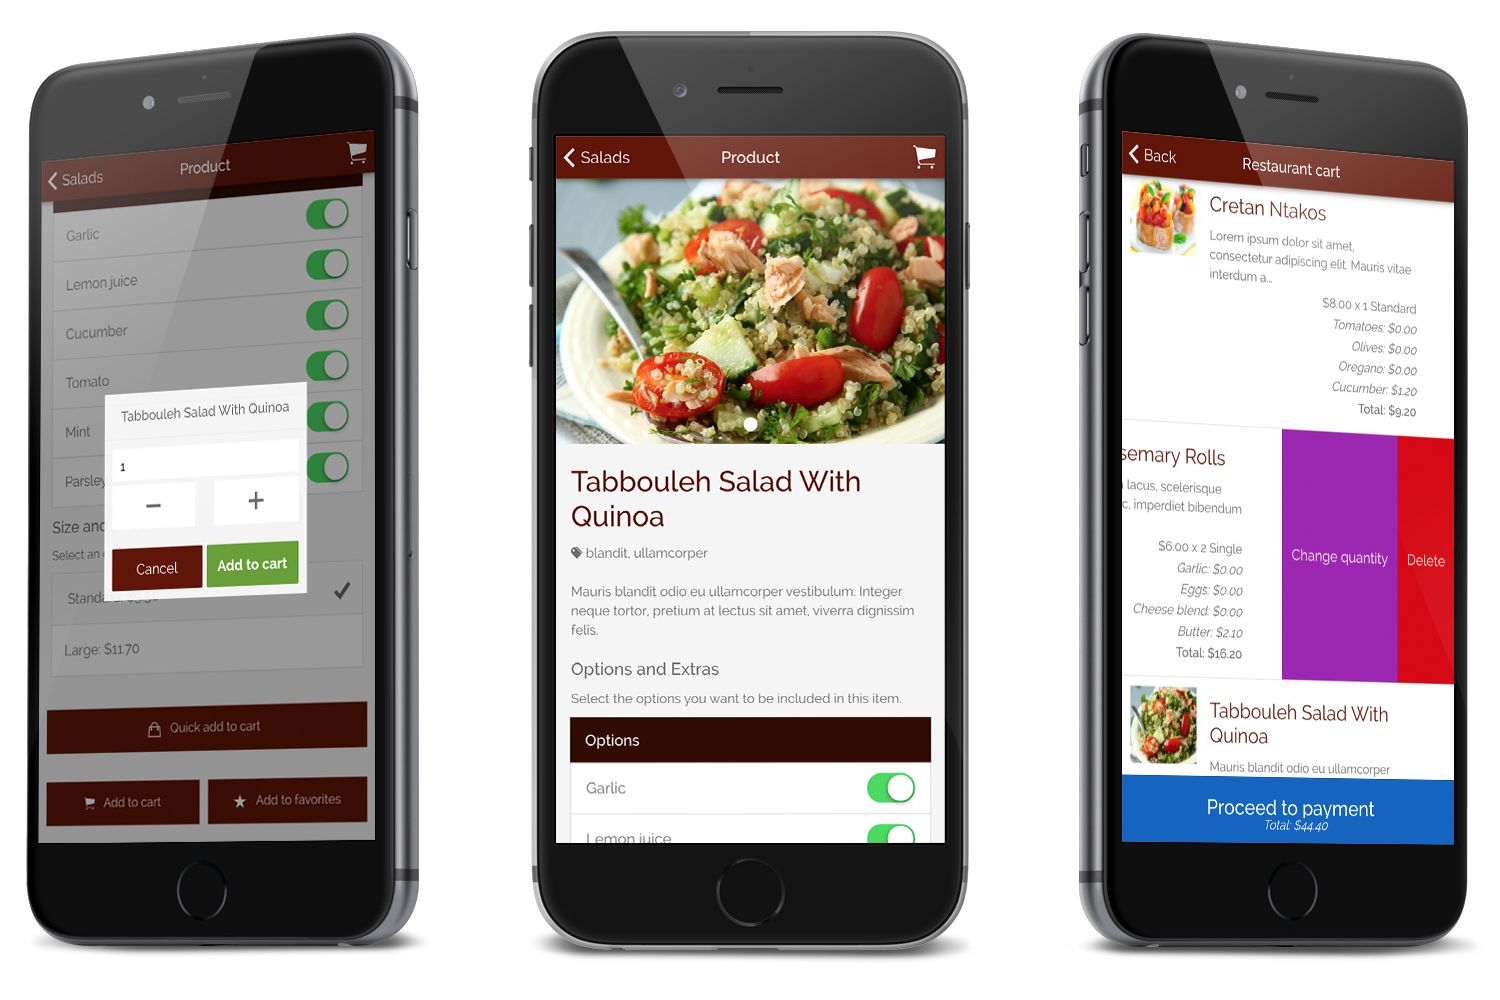 Restaurant Ionic Classy- Full Application with Firebase backend - 7